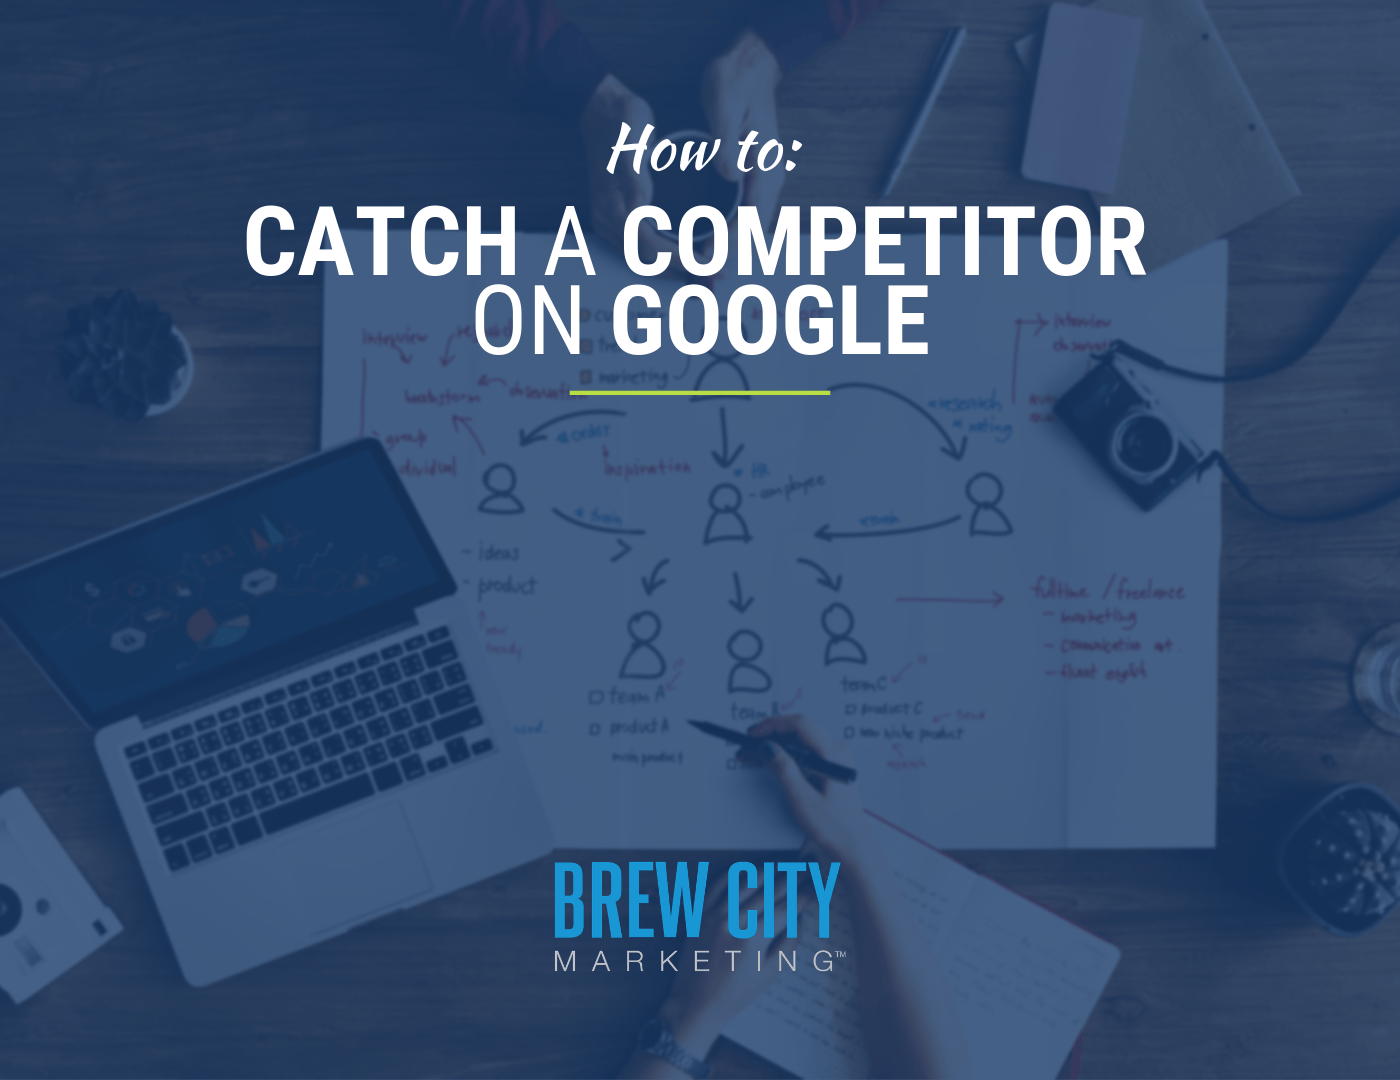 How to Catch a Competitor on Google